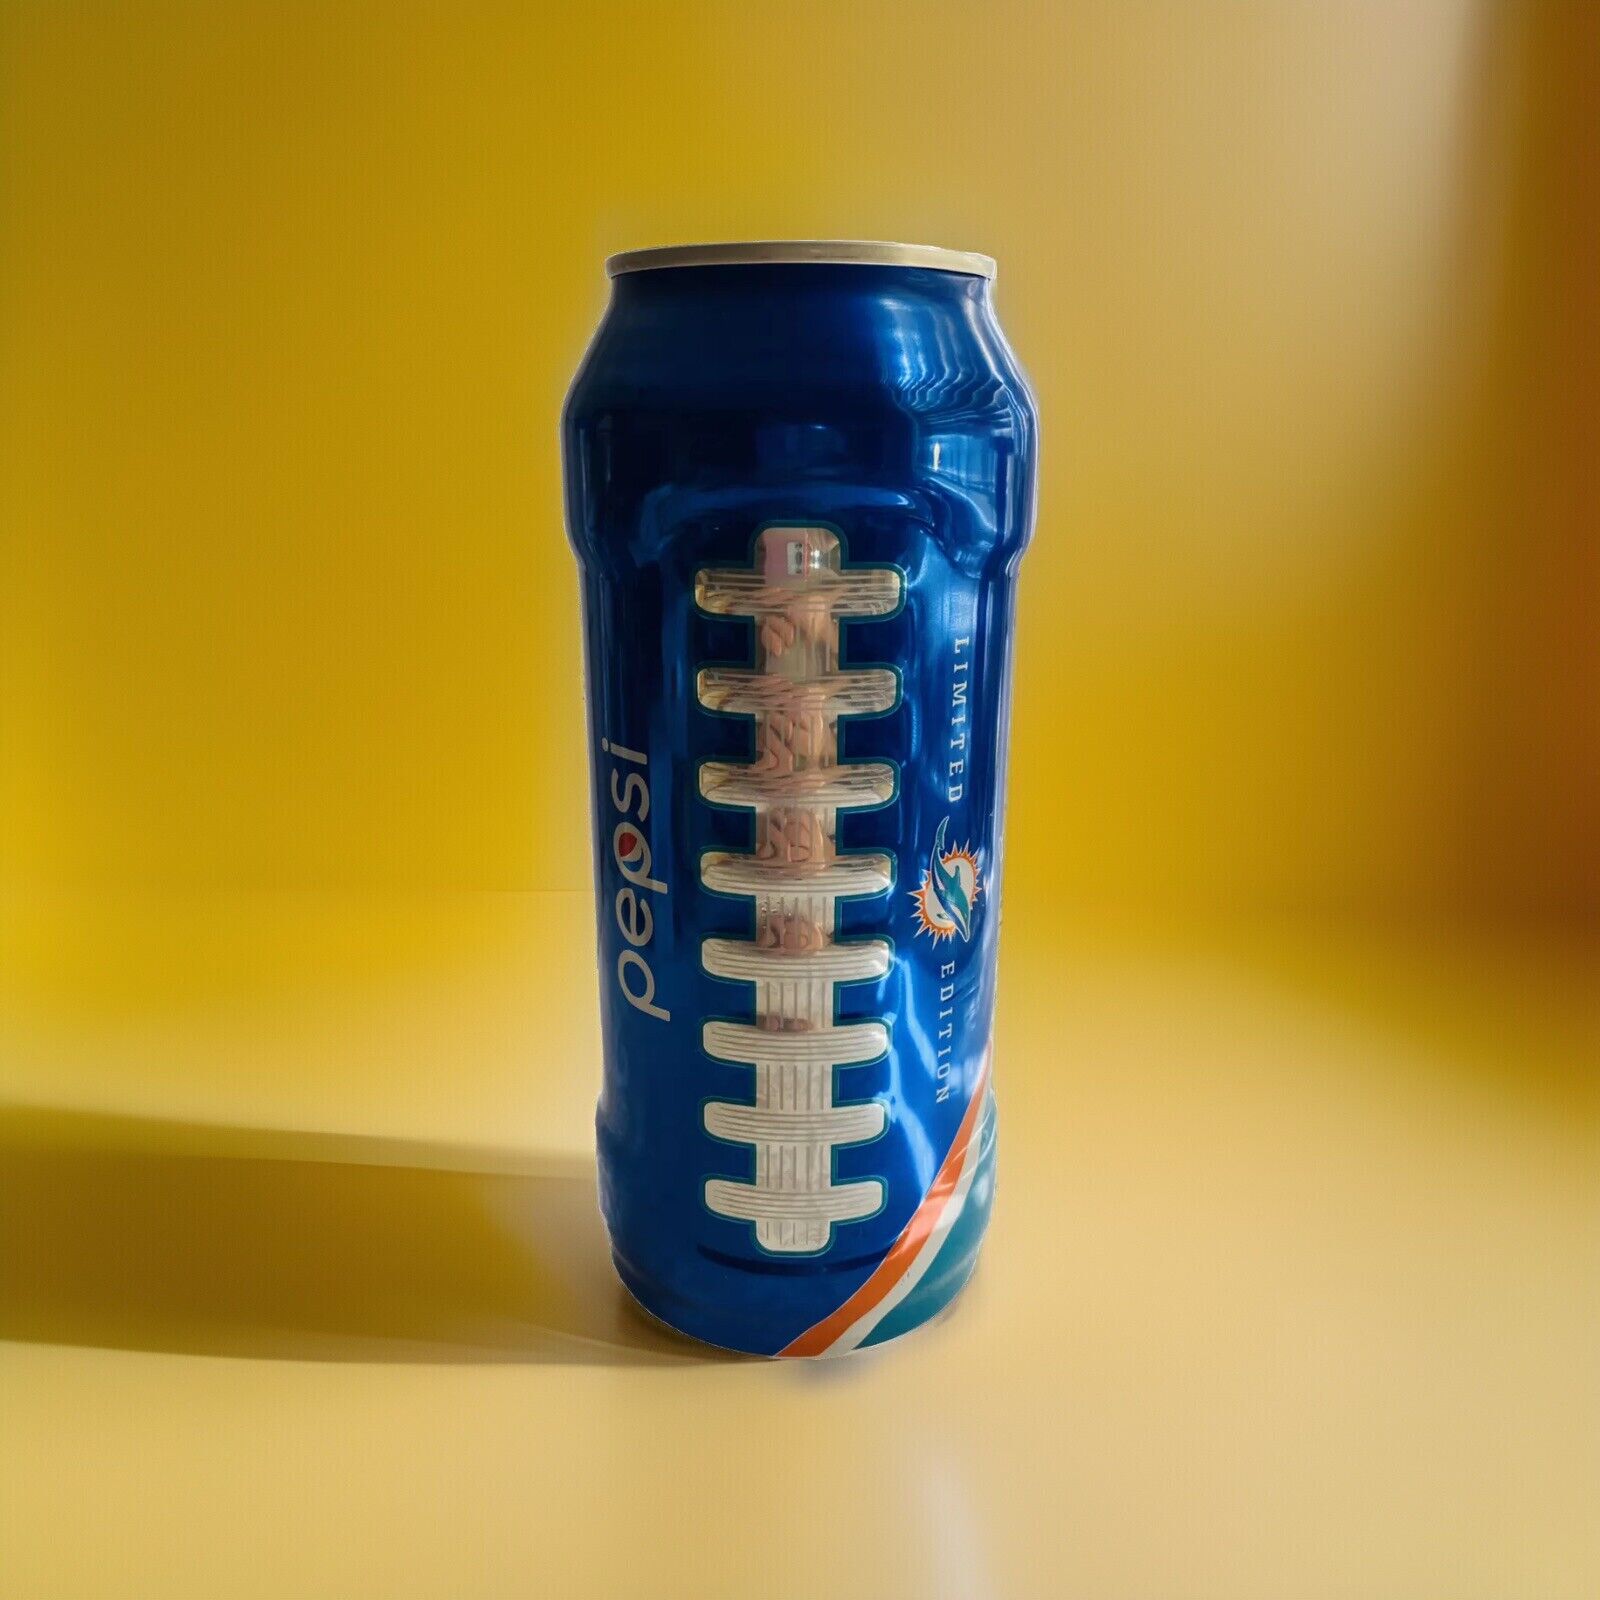 2020 Limited Edition Laces Pepsi Cola NFL, 17.4 oz Miami Dolphins UNOPENED CAN